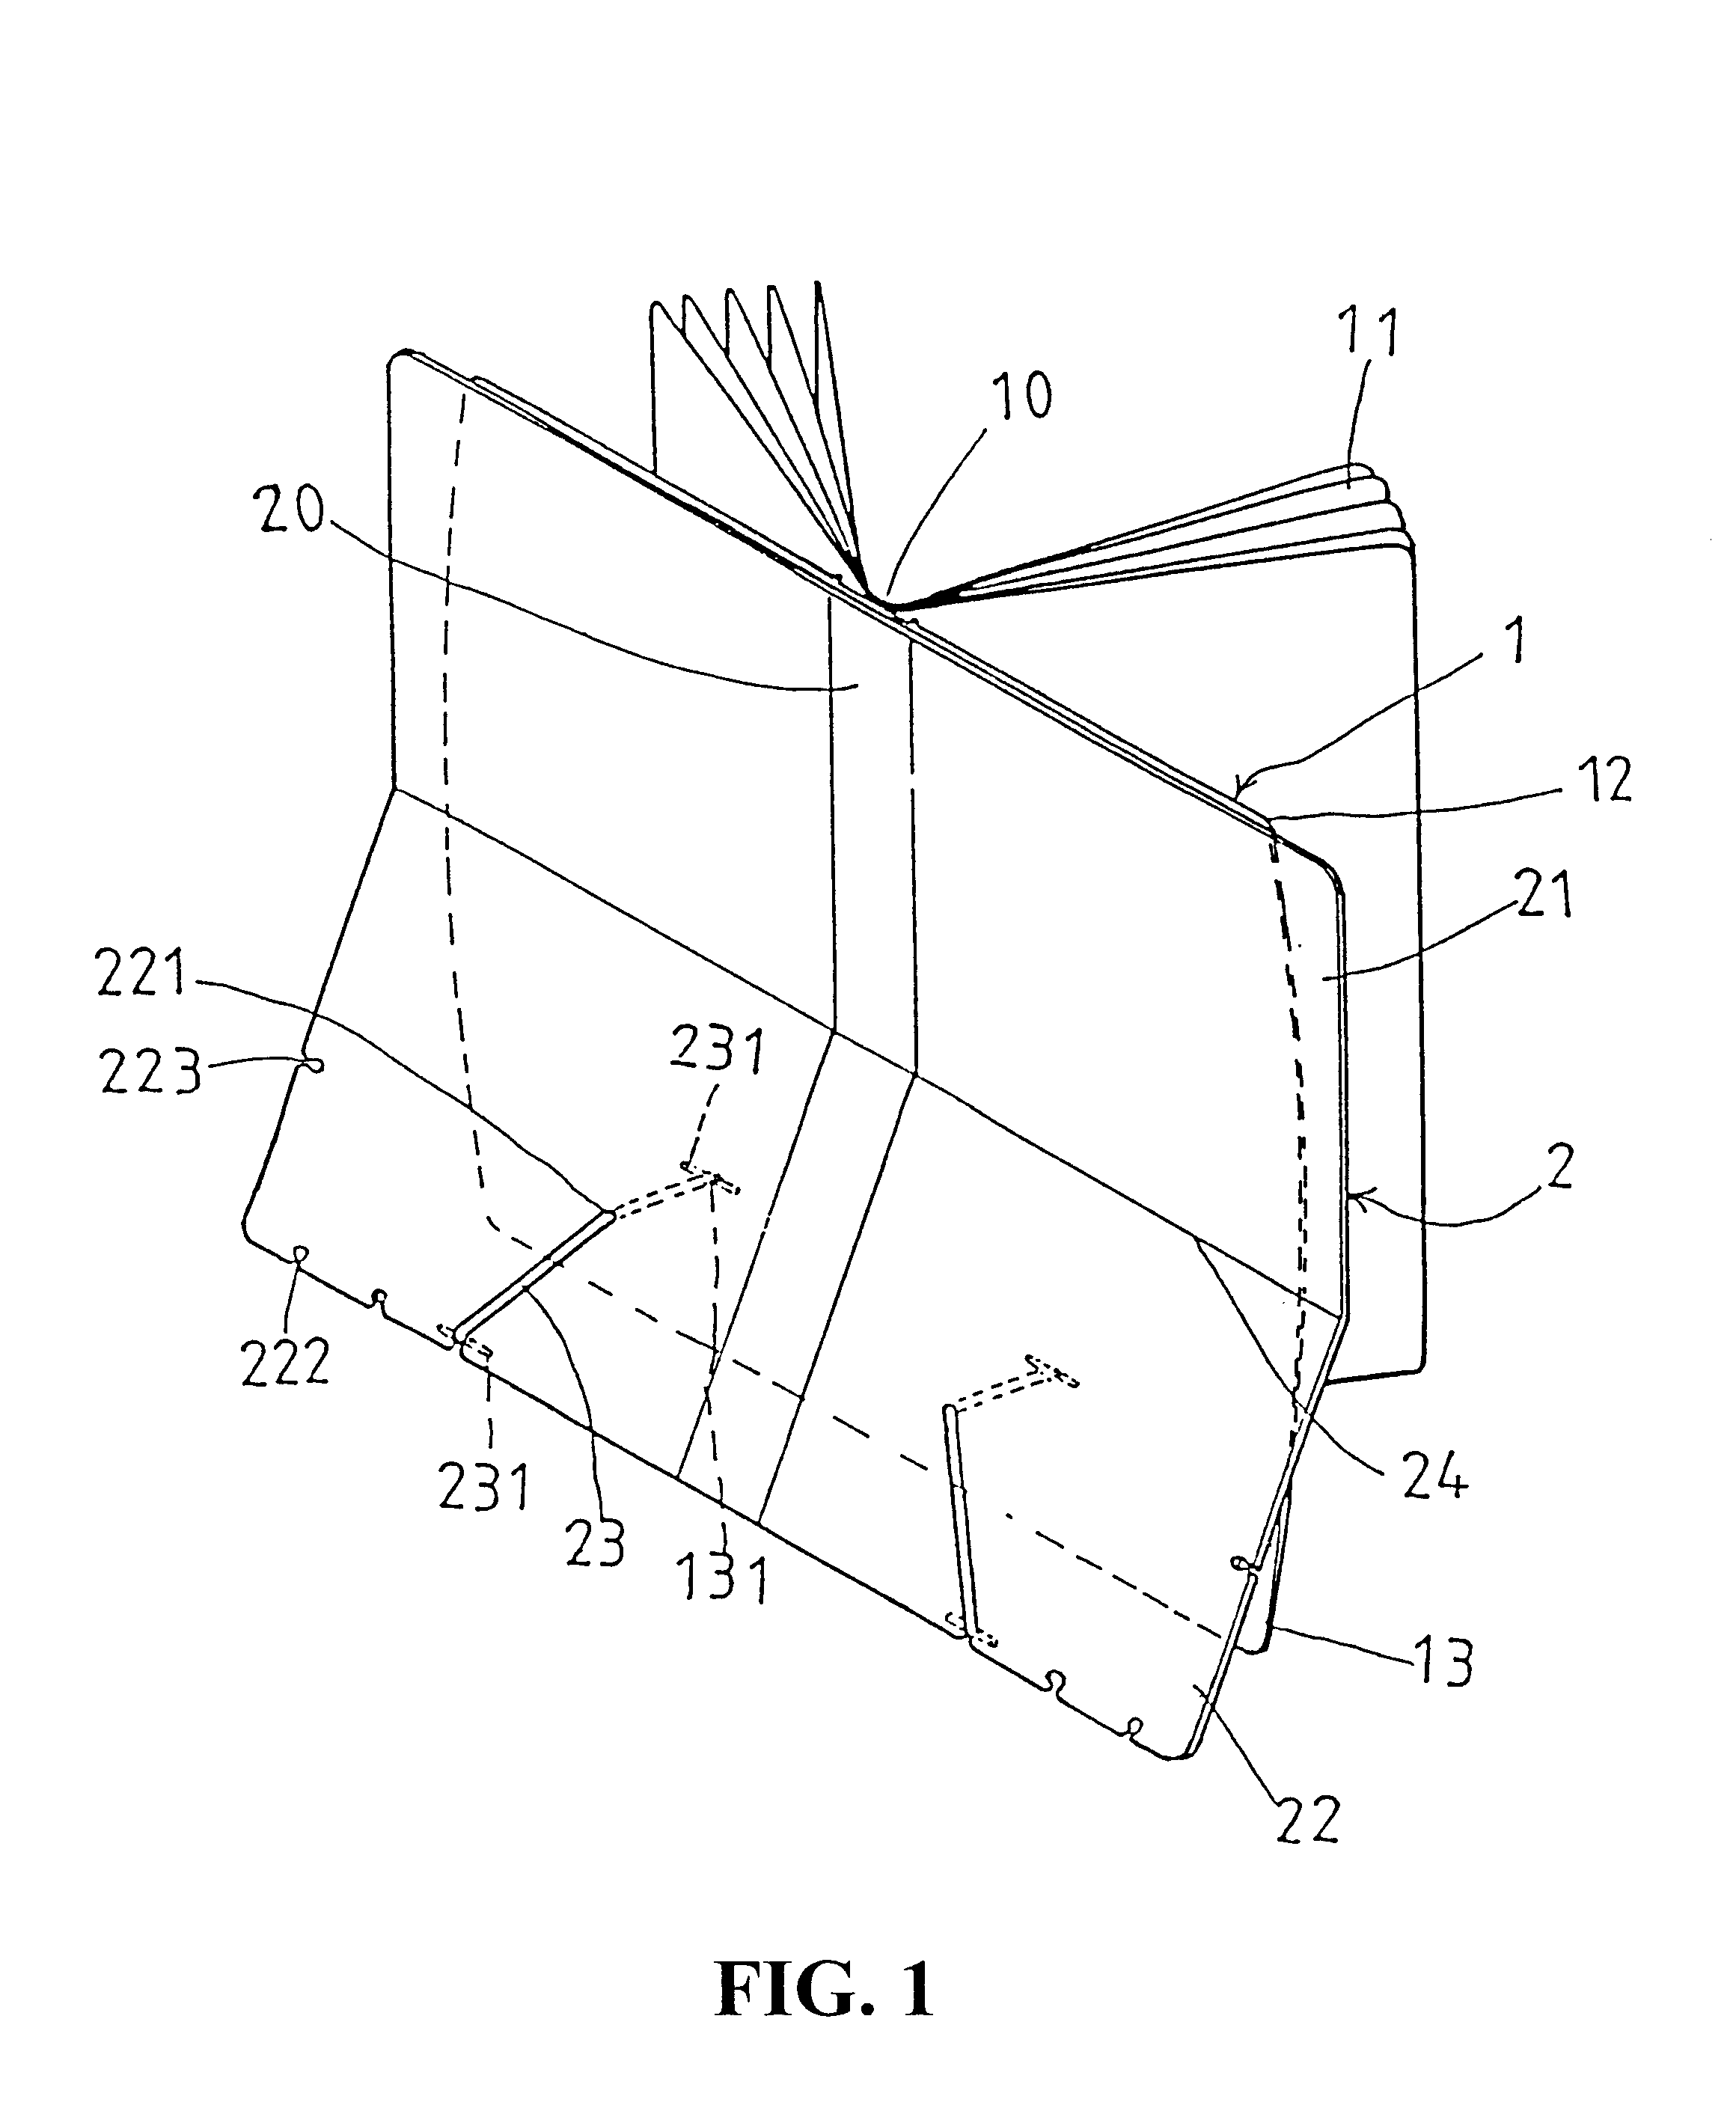 Structure of a file with adjustable inclination angle